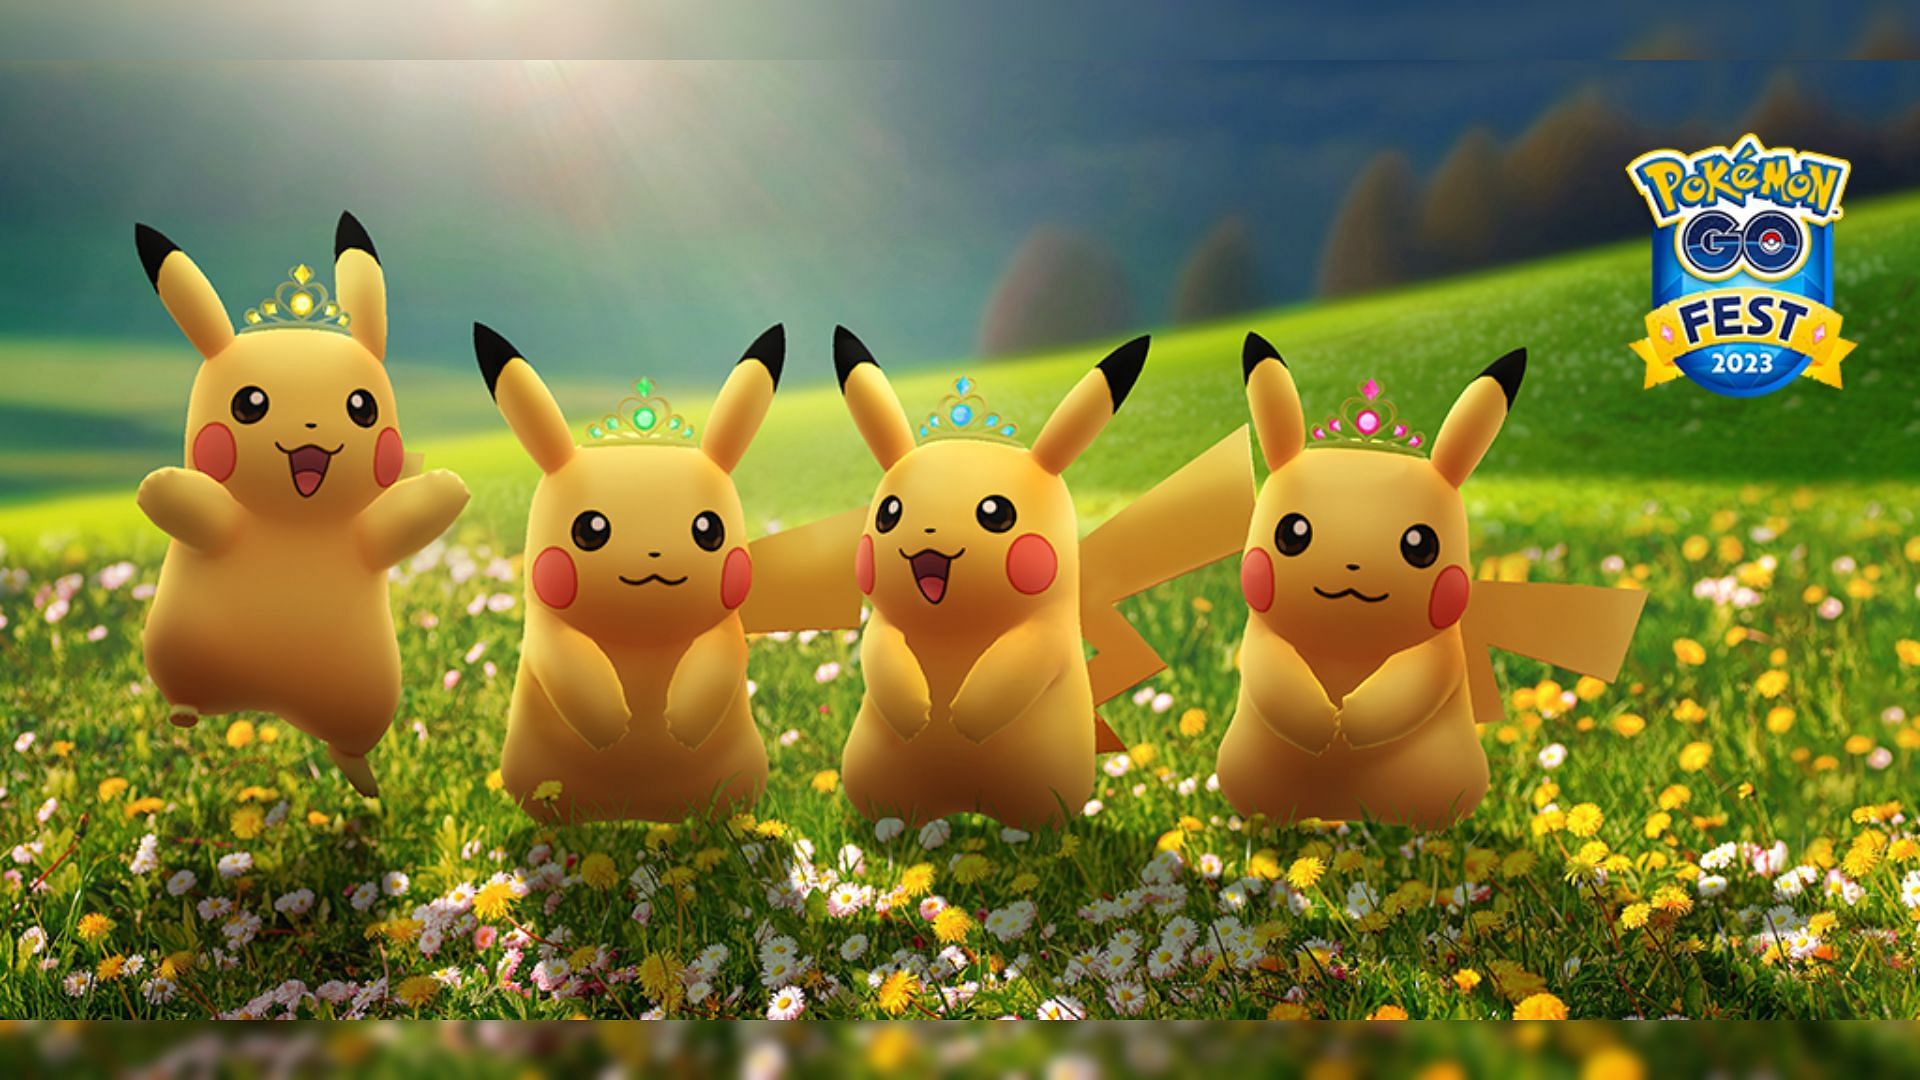 Special crowned Pikachu will be featured in Pokemon GO Fest 2023 (Image via Niantic)